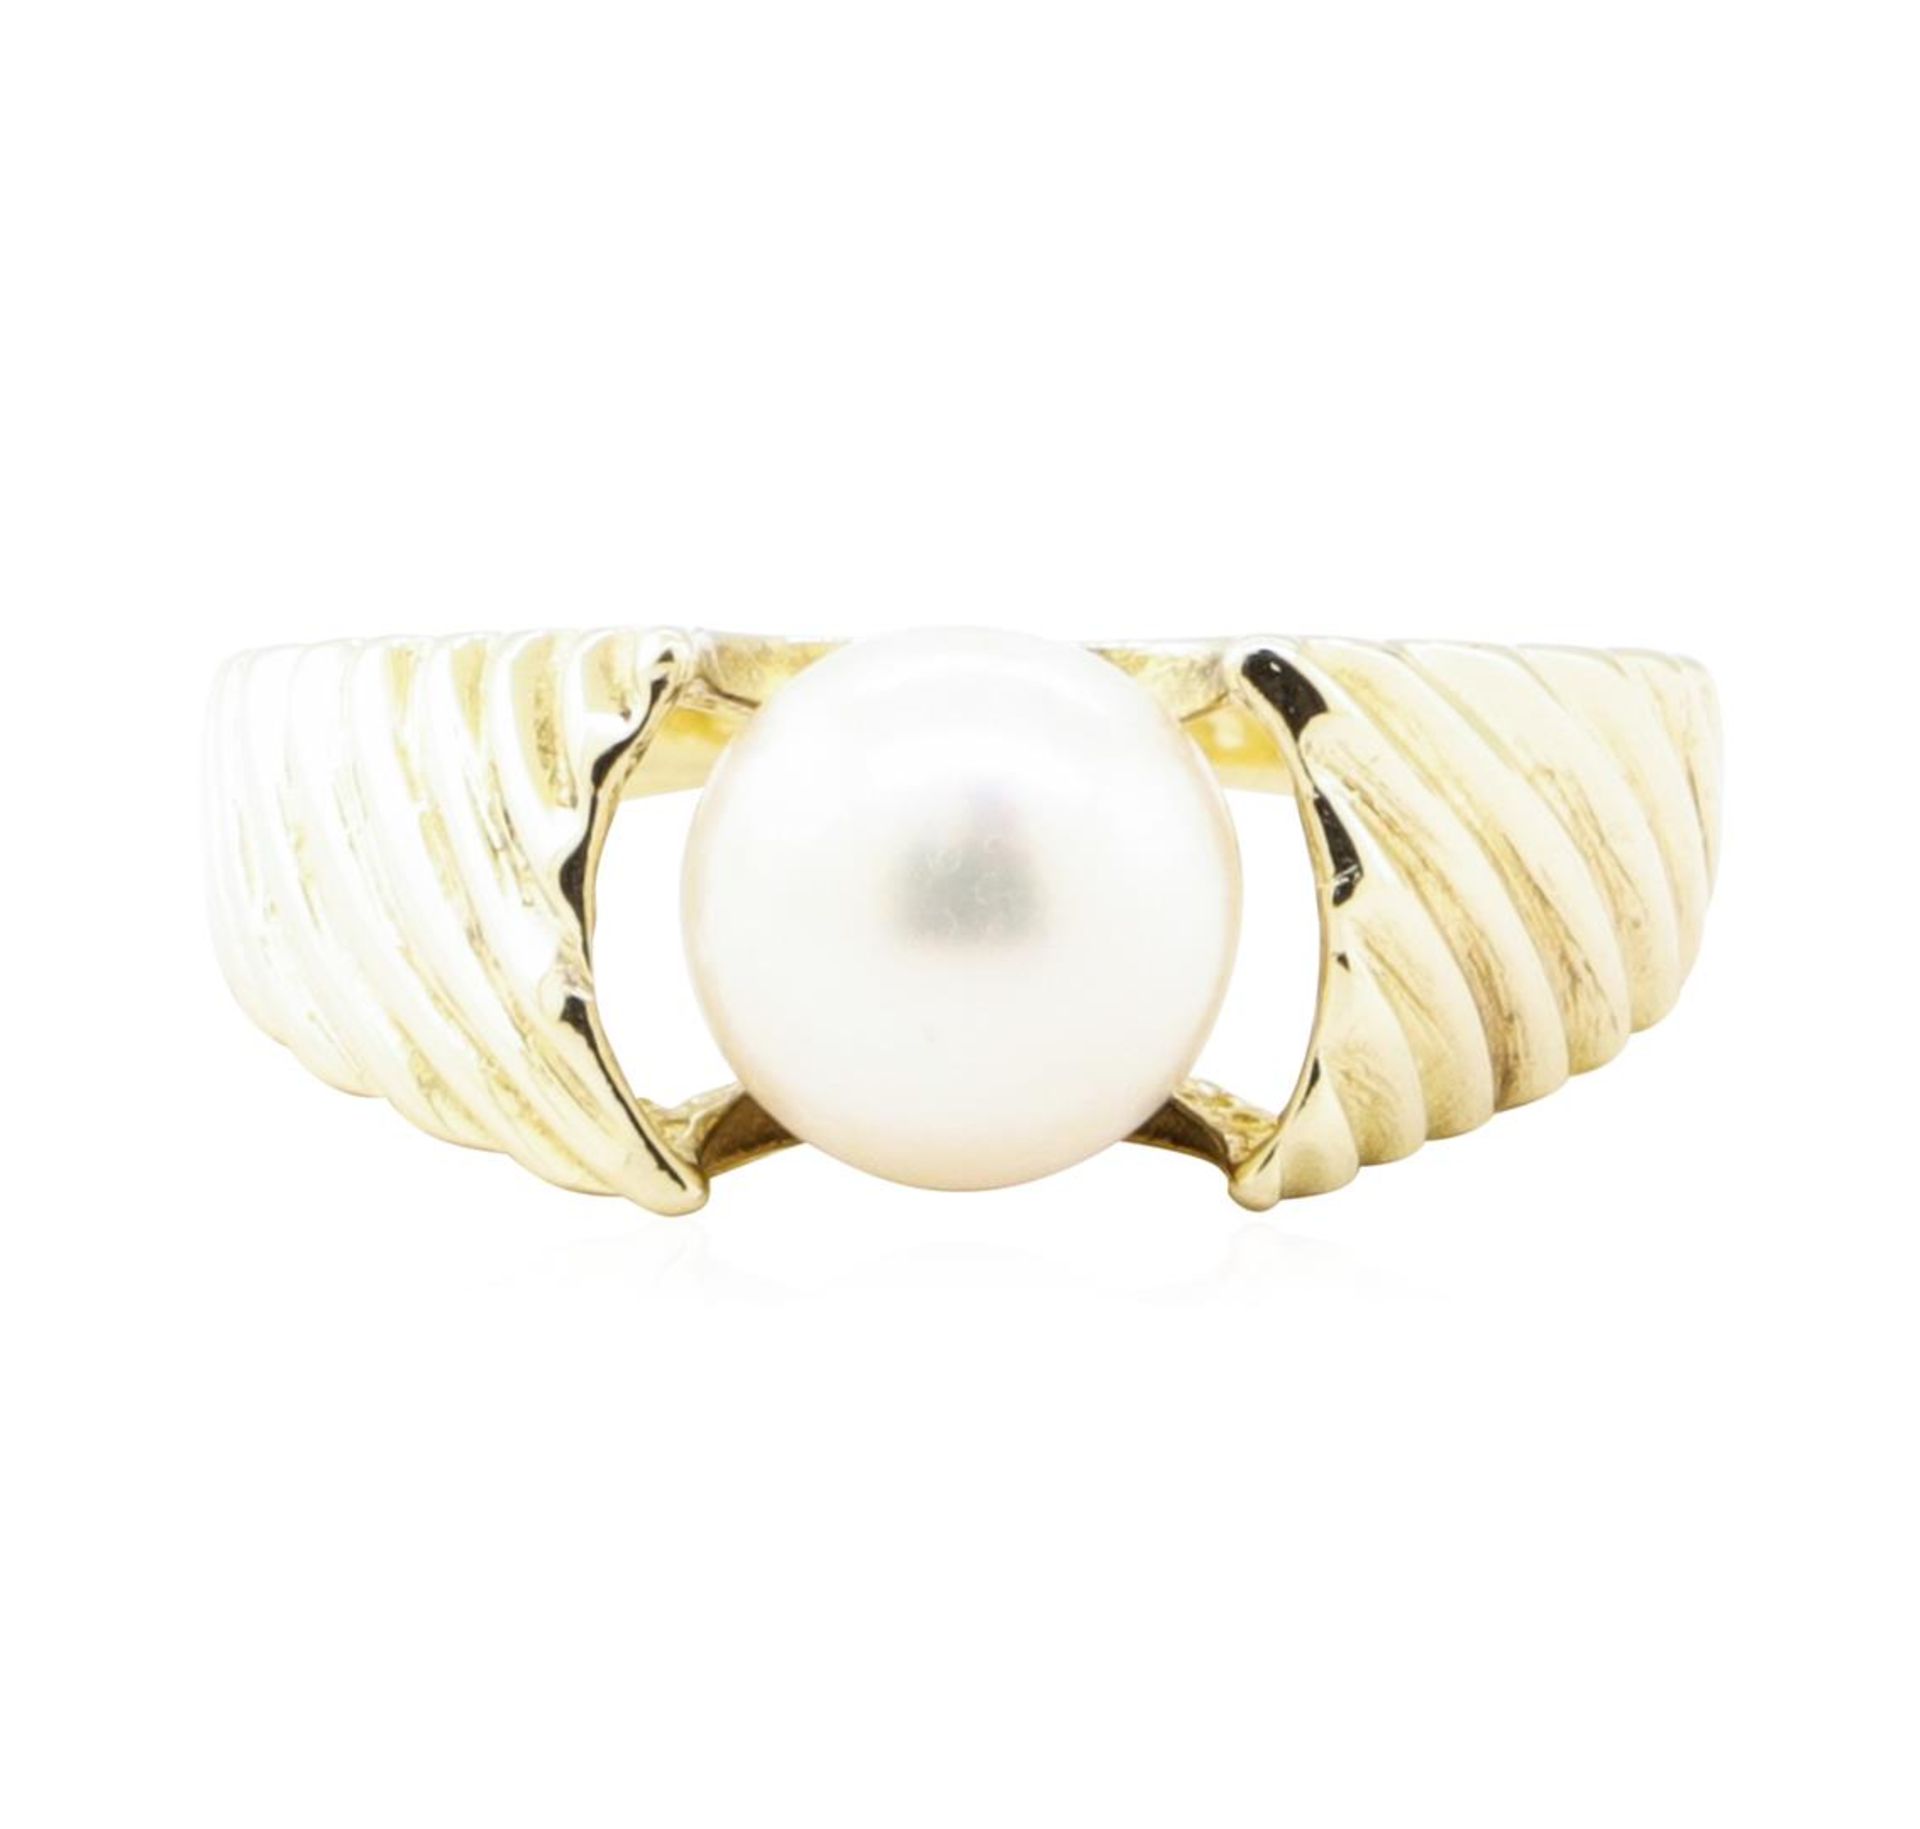 7mm Cultured Pearl Ring - 14KT Yellow Gold - Image 2 of 4